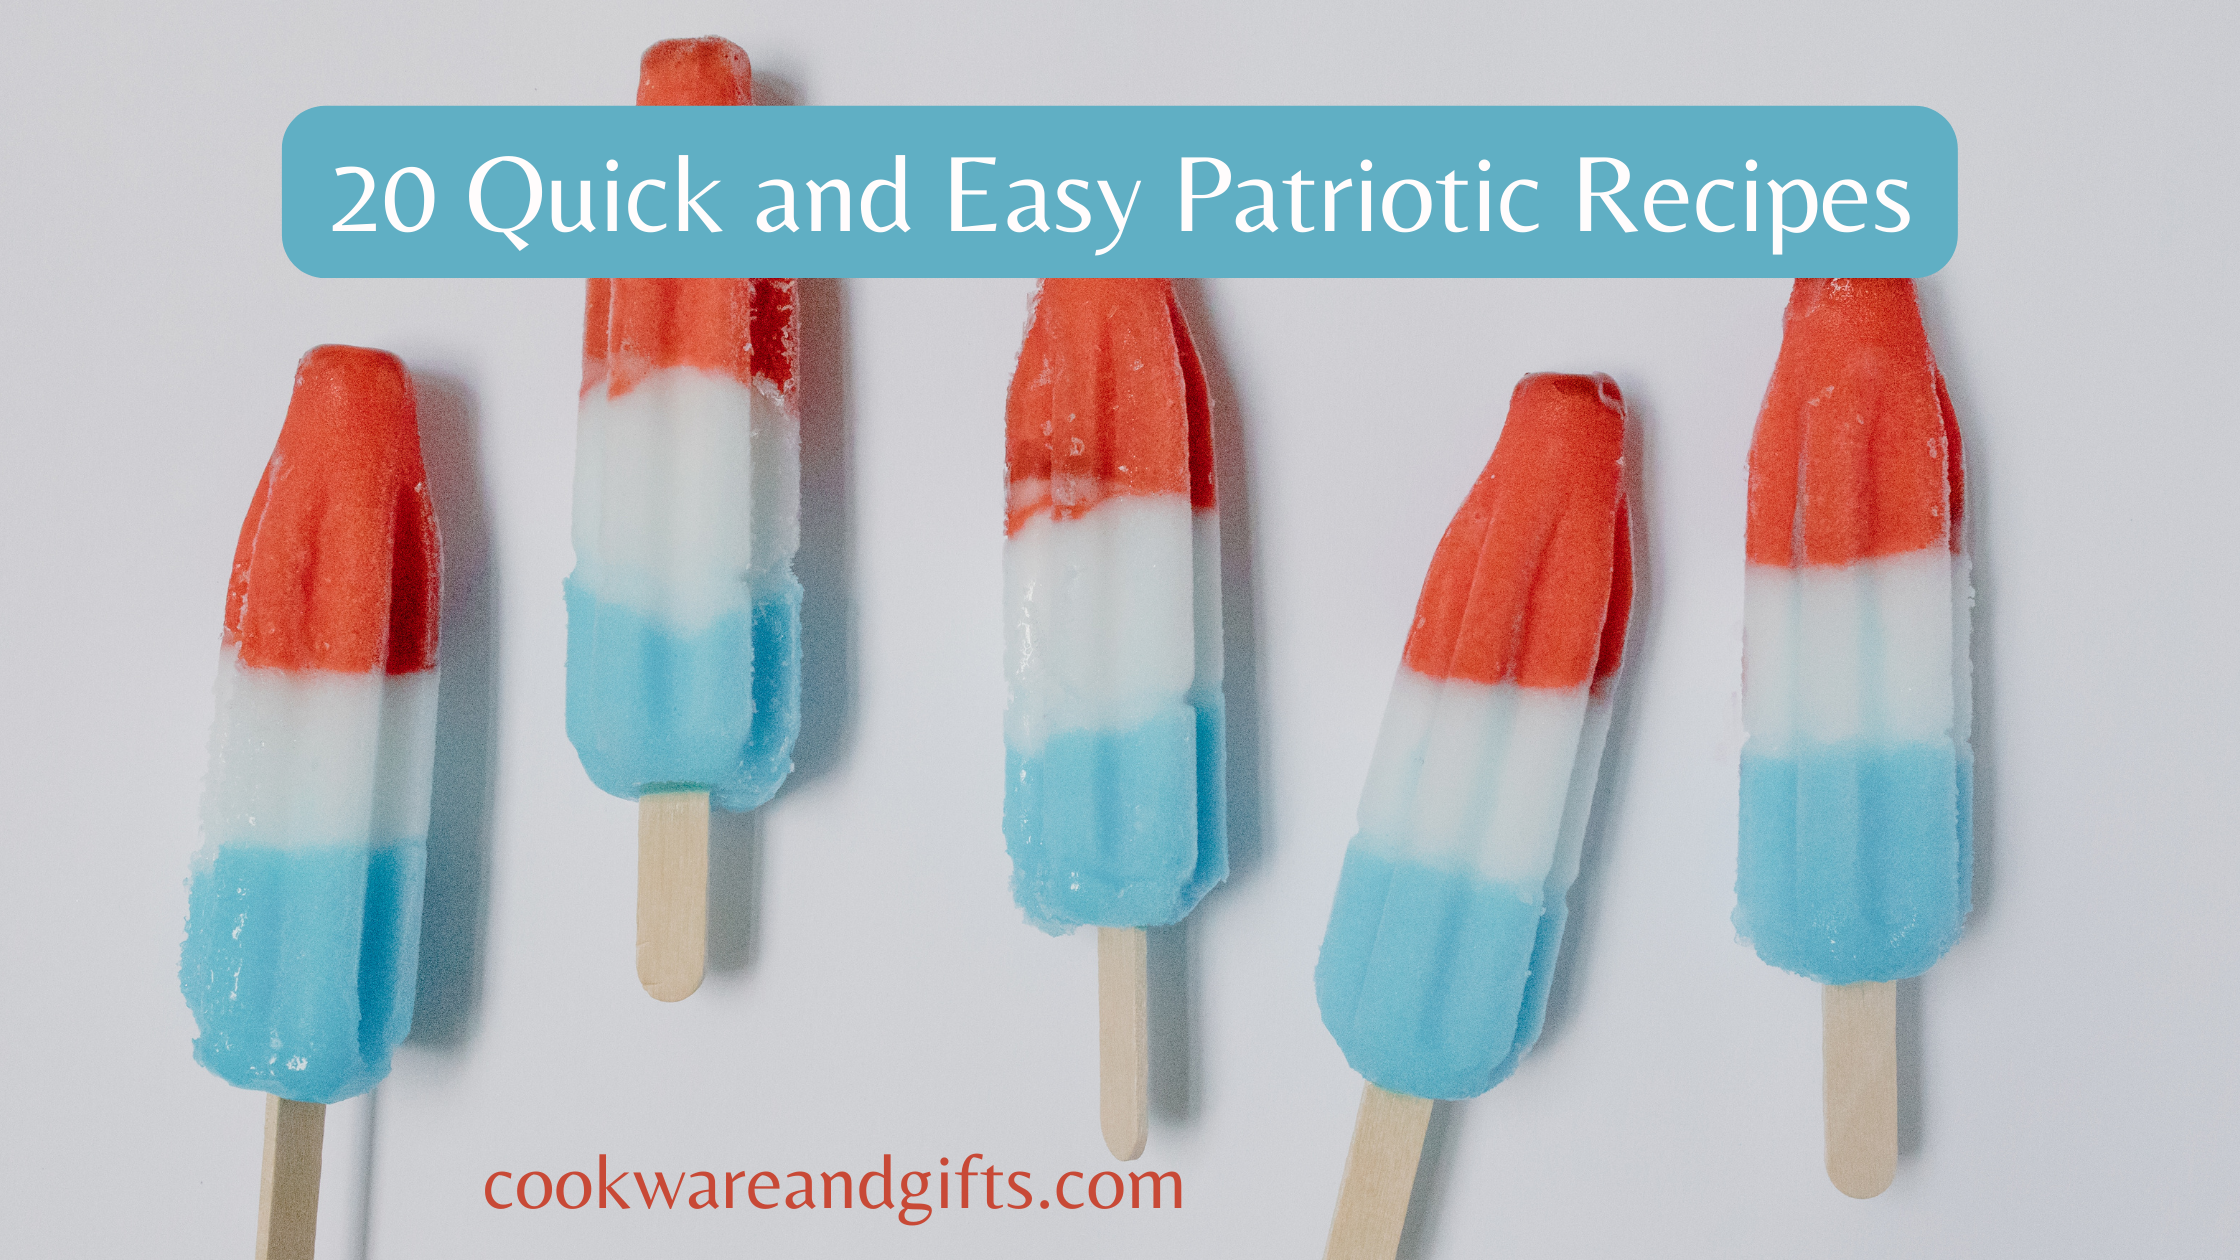 Red white and blue popsicles with text over top reading 20 Quick and Easy Patriotic Recipes